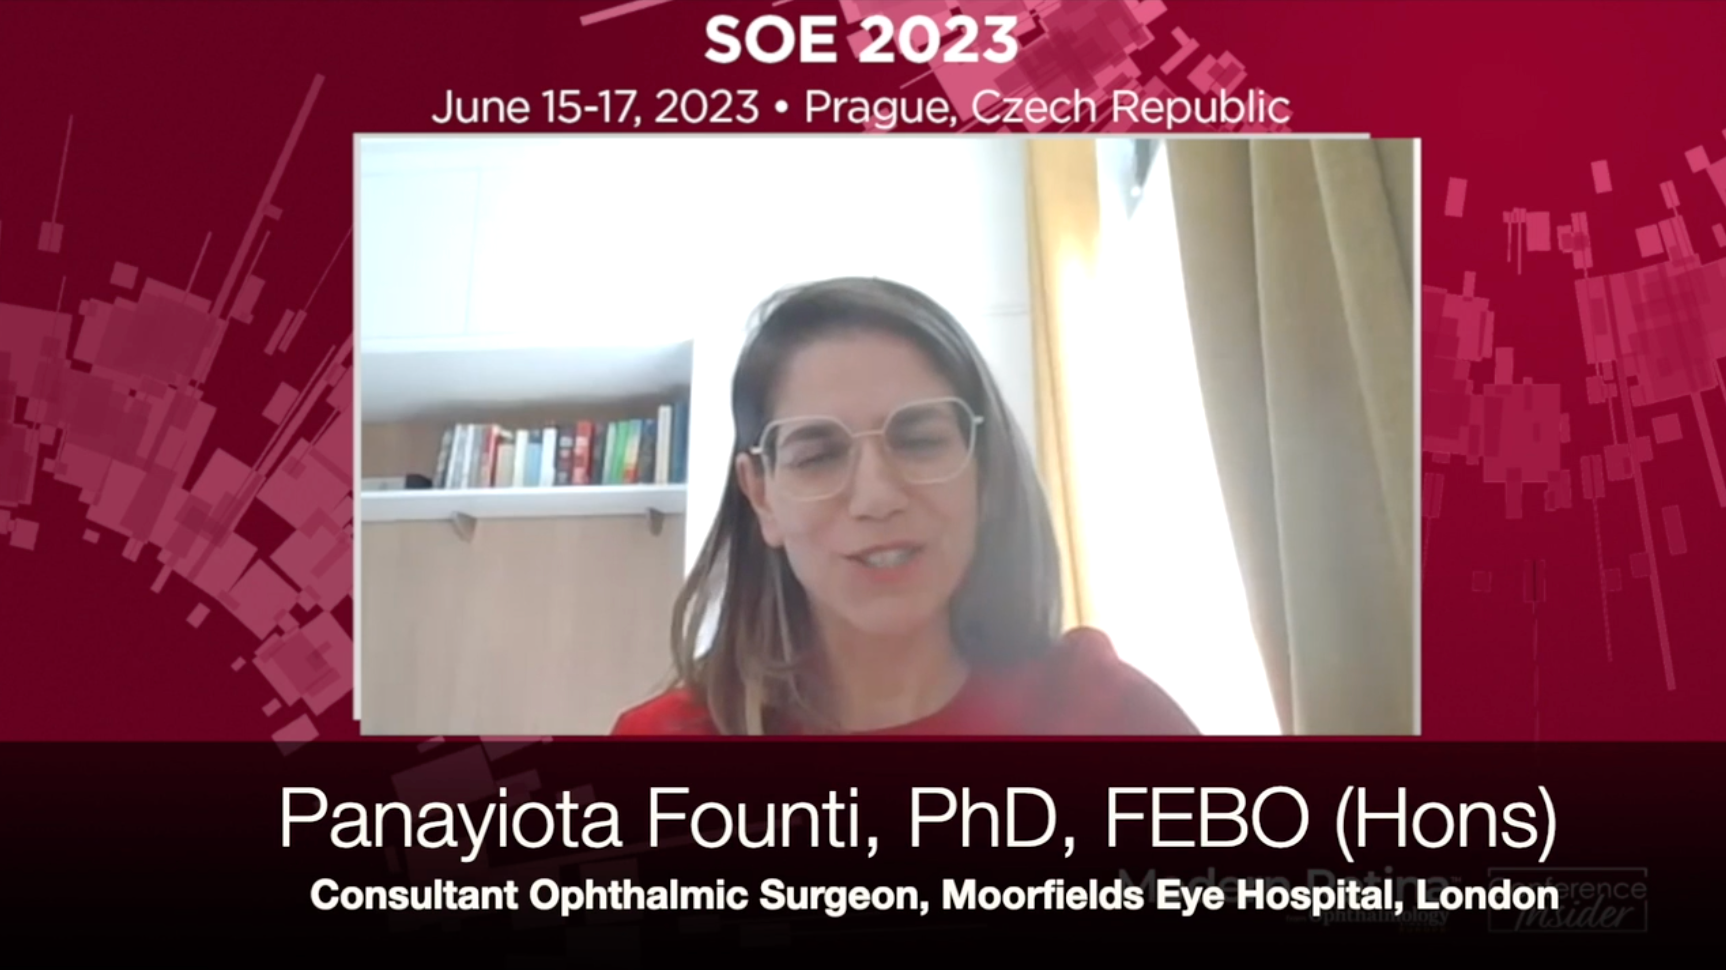 Panayiota Founti, PhD, presenting 'What new surgeries will hit the glaucoma market?' via virtual appearance